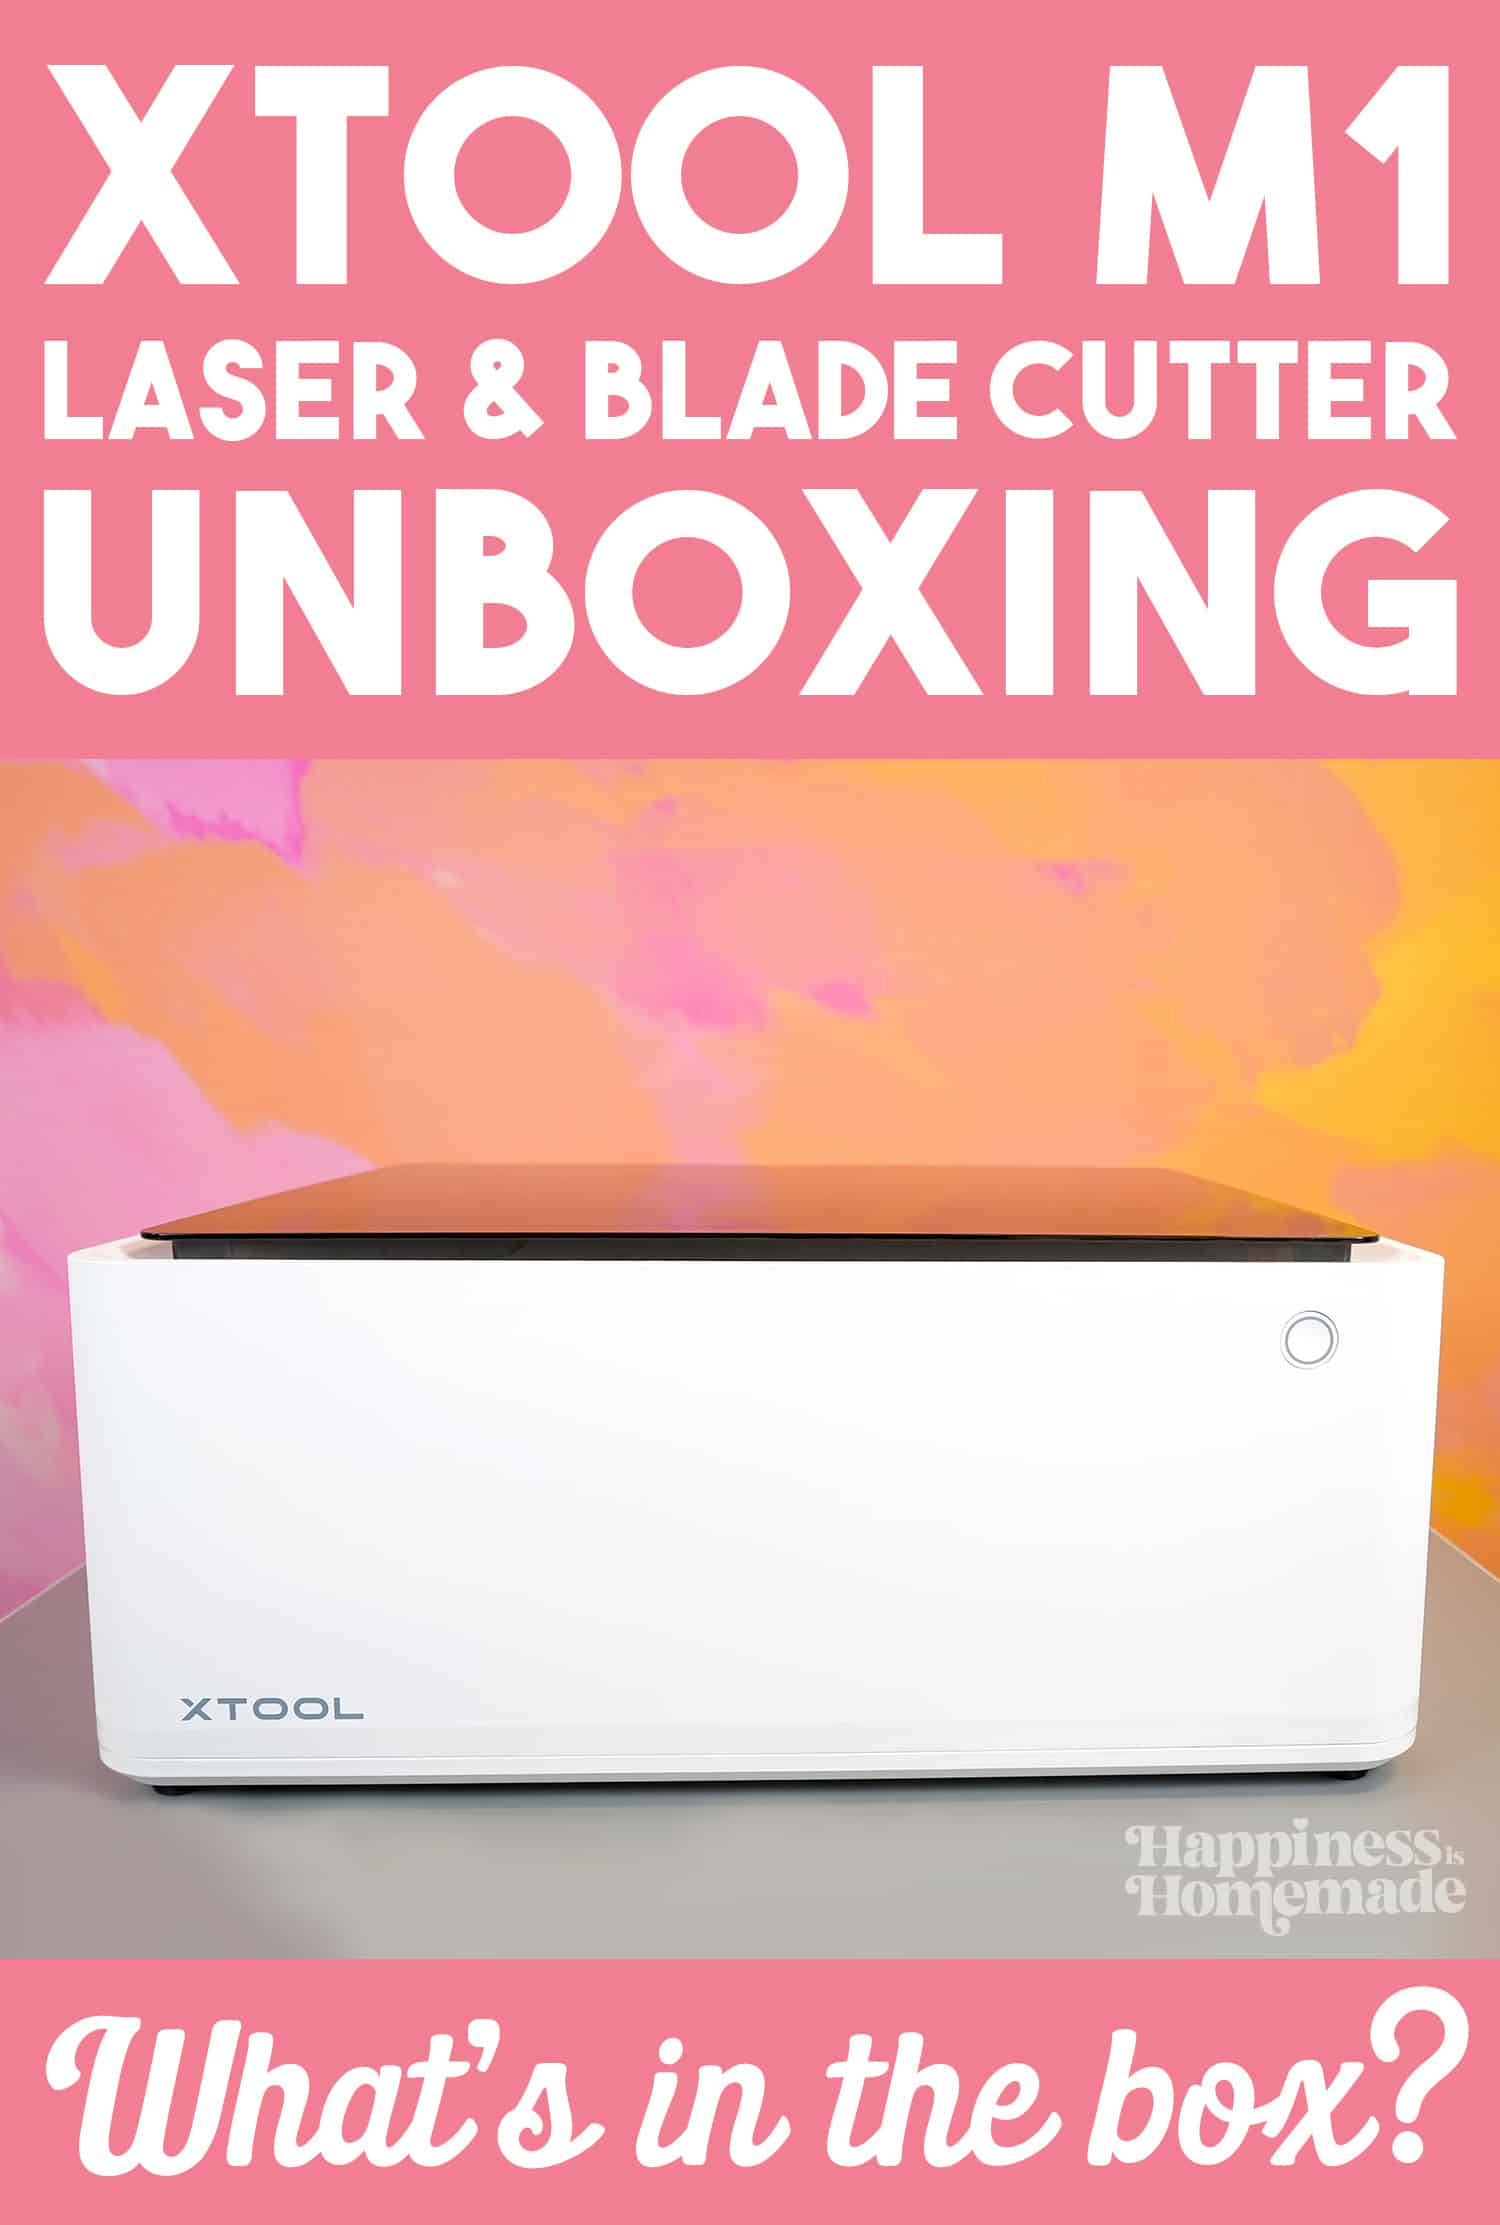 xTool M1 Laser Unboxing – What’s in the Box?